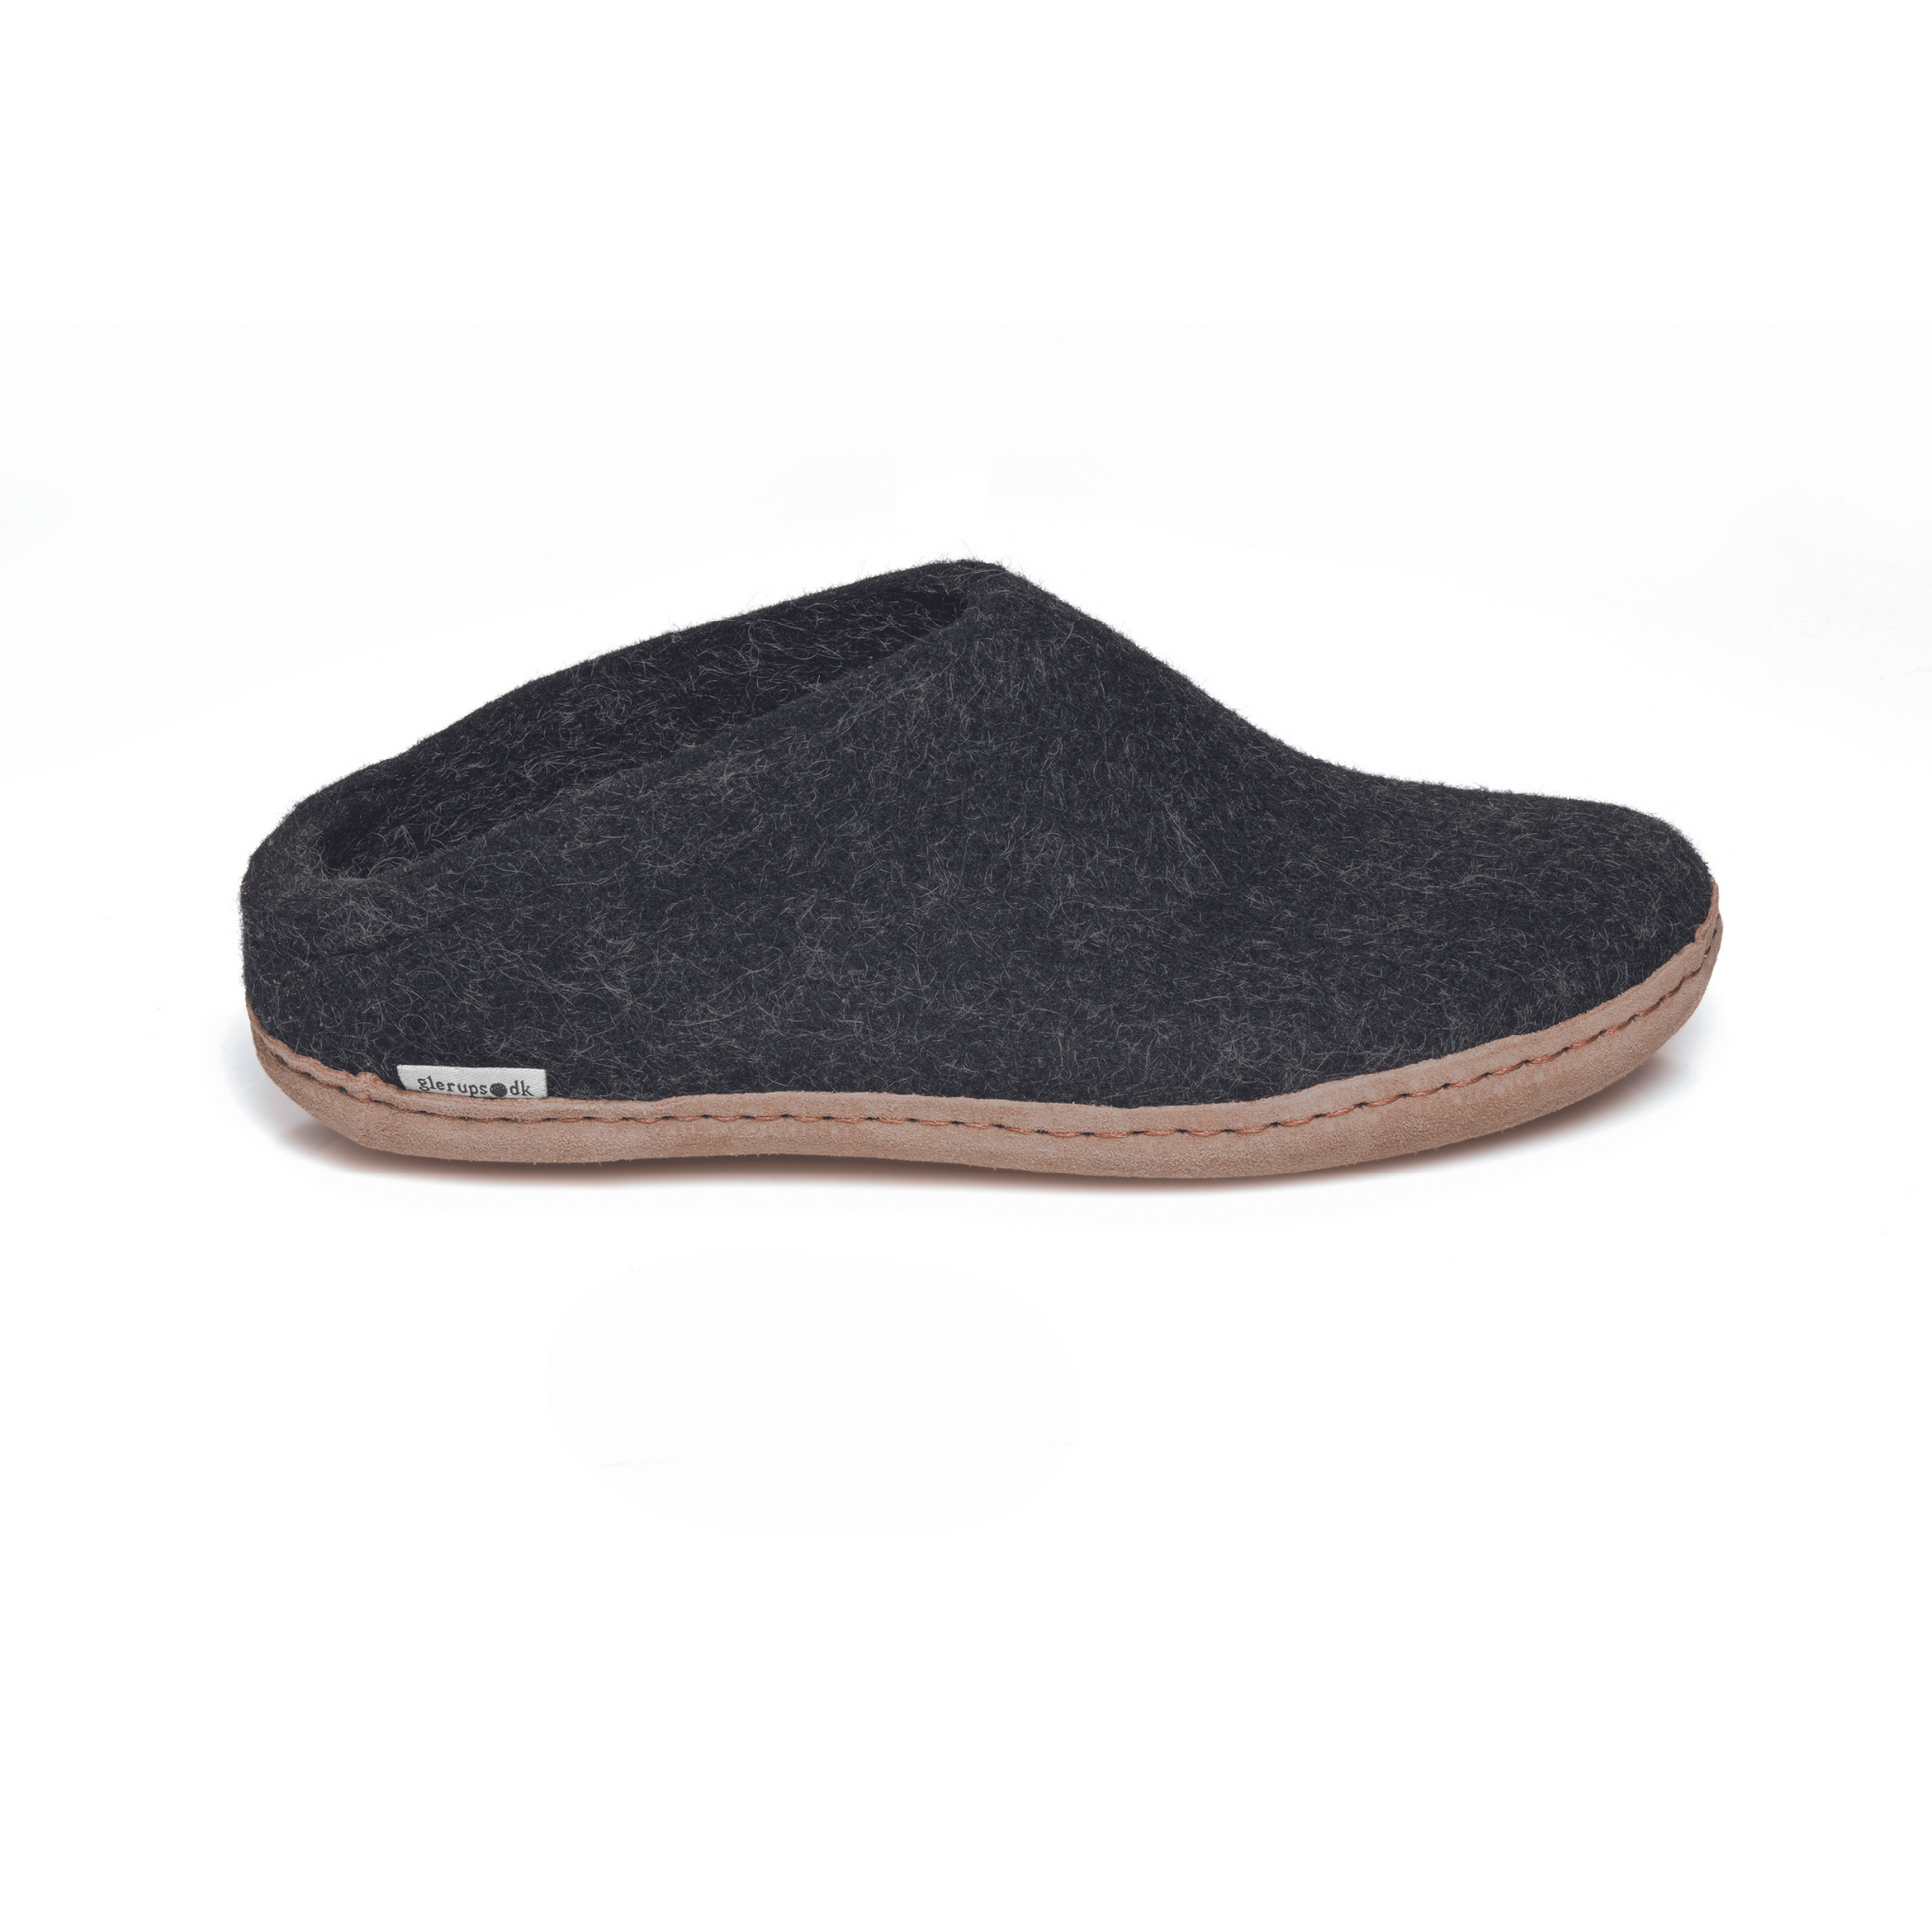 A dark grey slipper is pictured in profile, showing the low back of the heel. The bottom lined in tan leather has a small tag with the brand name attached in the seam where the leather meets the felted wool.